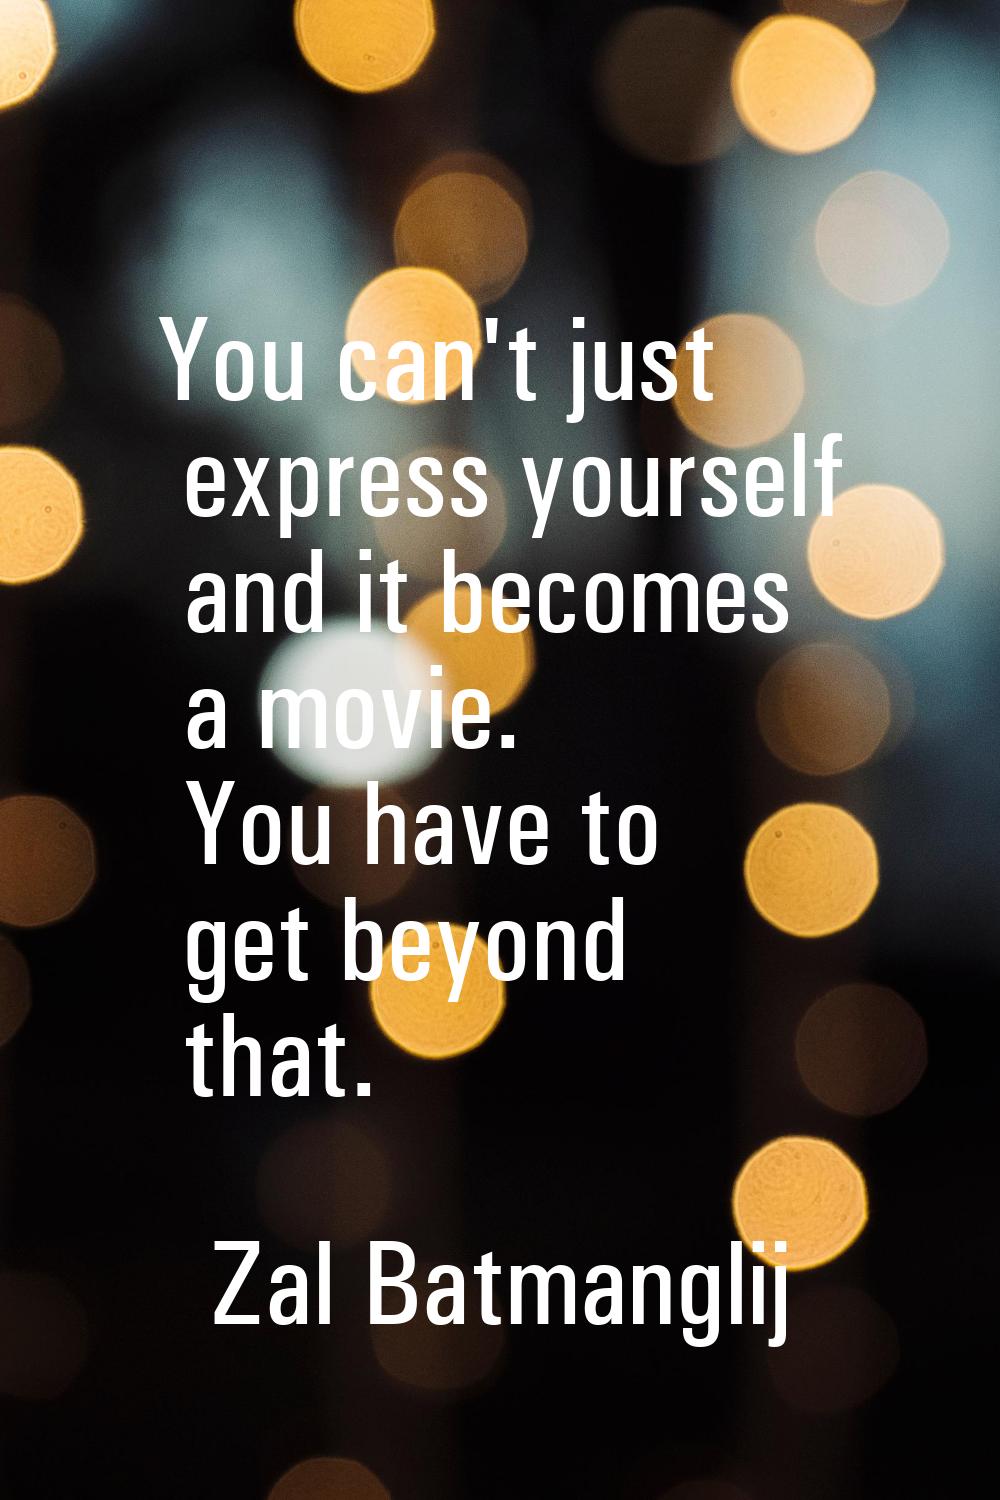 You can't just express yourself and it becomes a movie. You have to get beyond that.